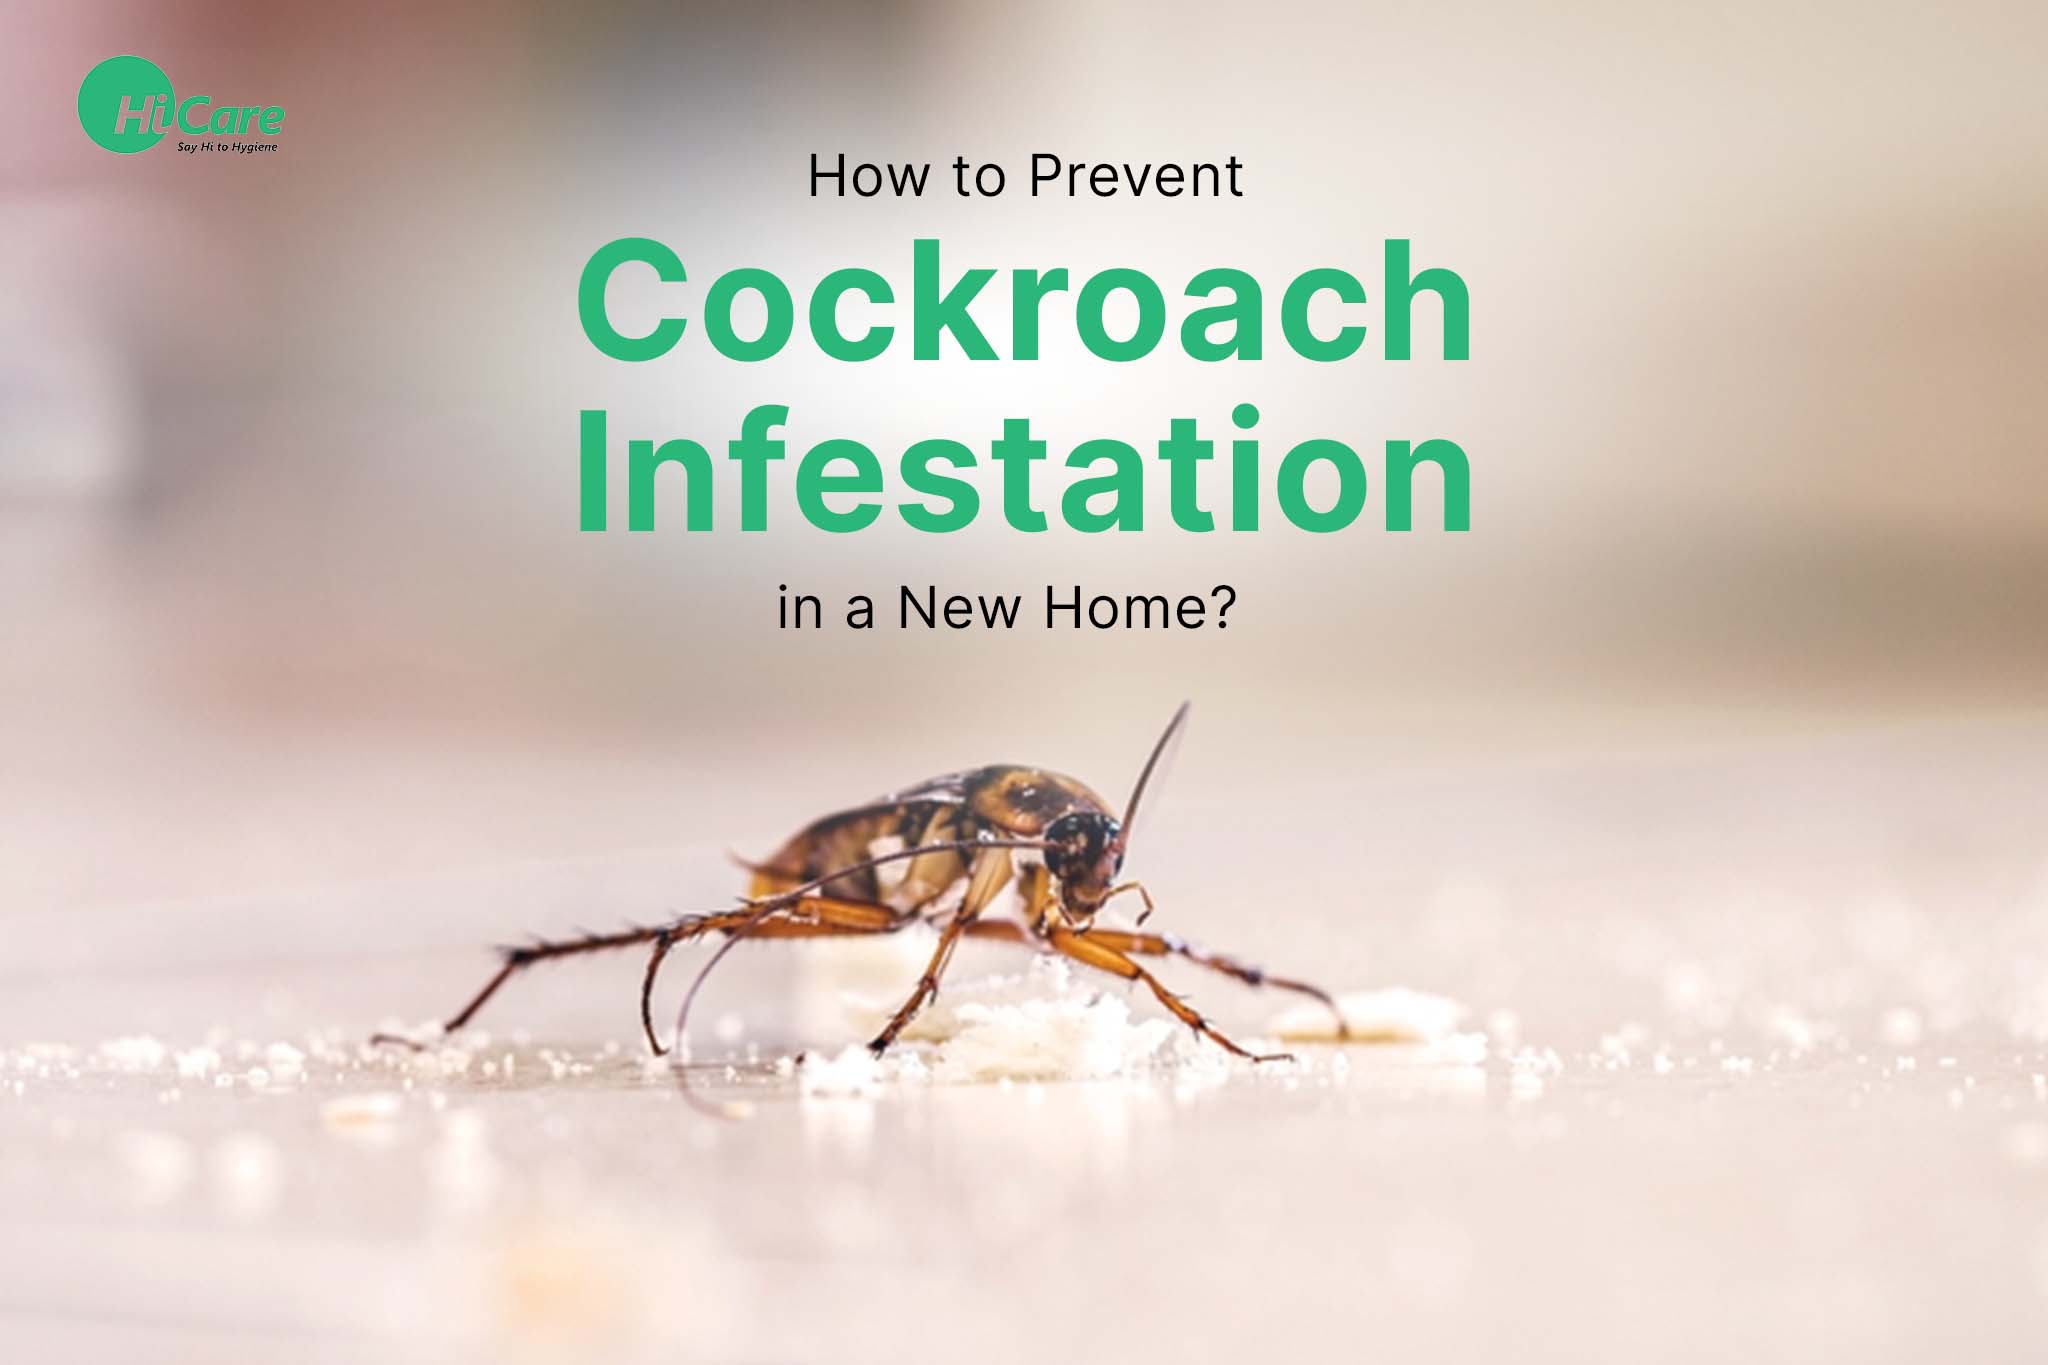 How to Prevent Cockroach Infestation in a New Home?